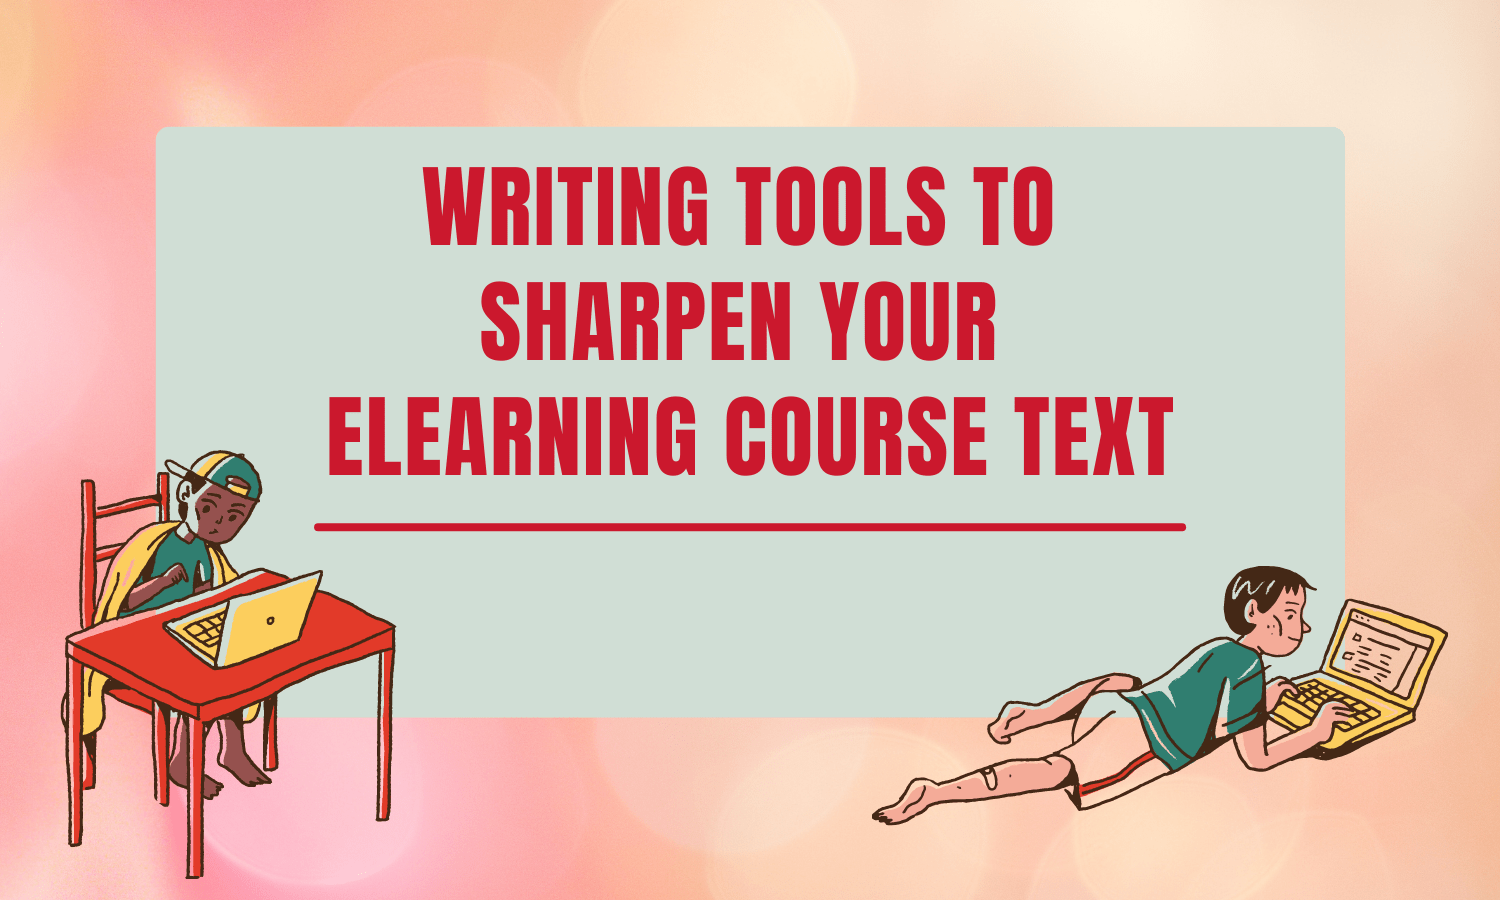 Writing tools for elearning course